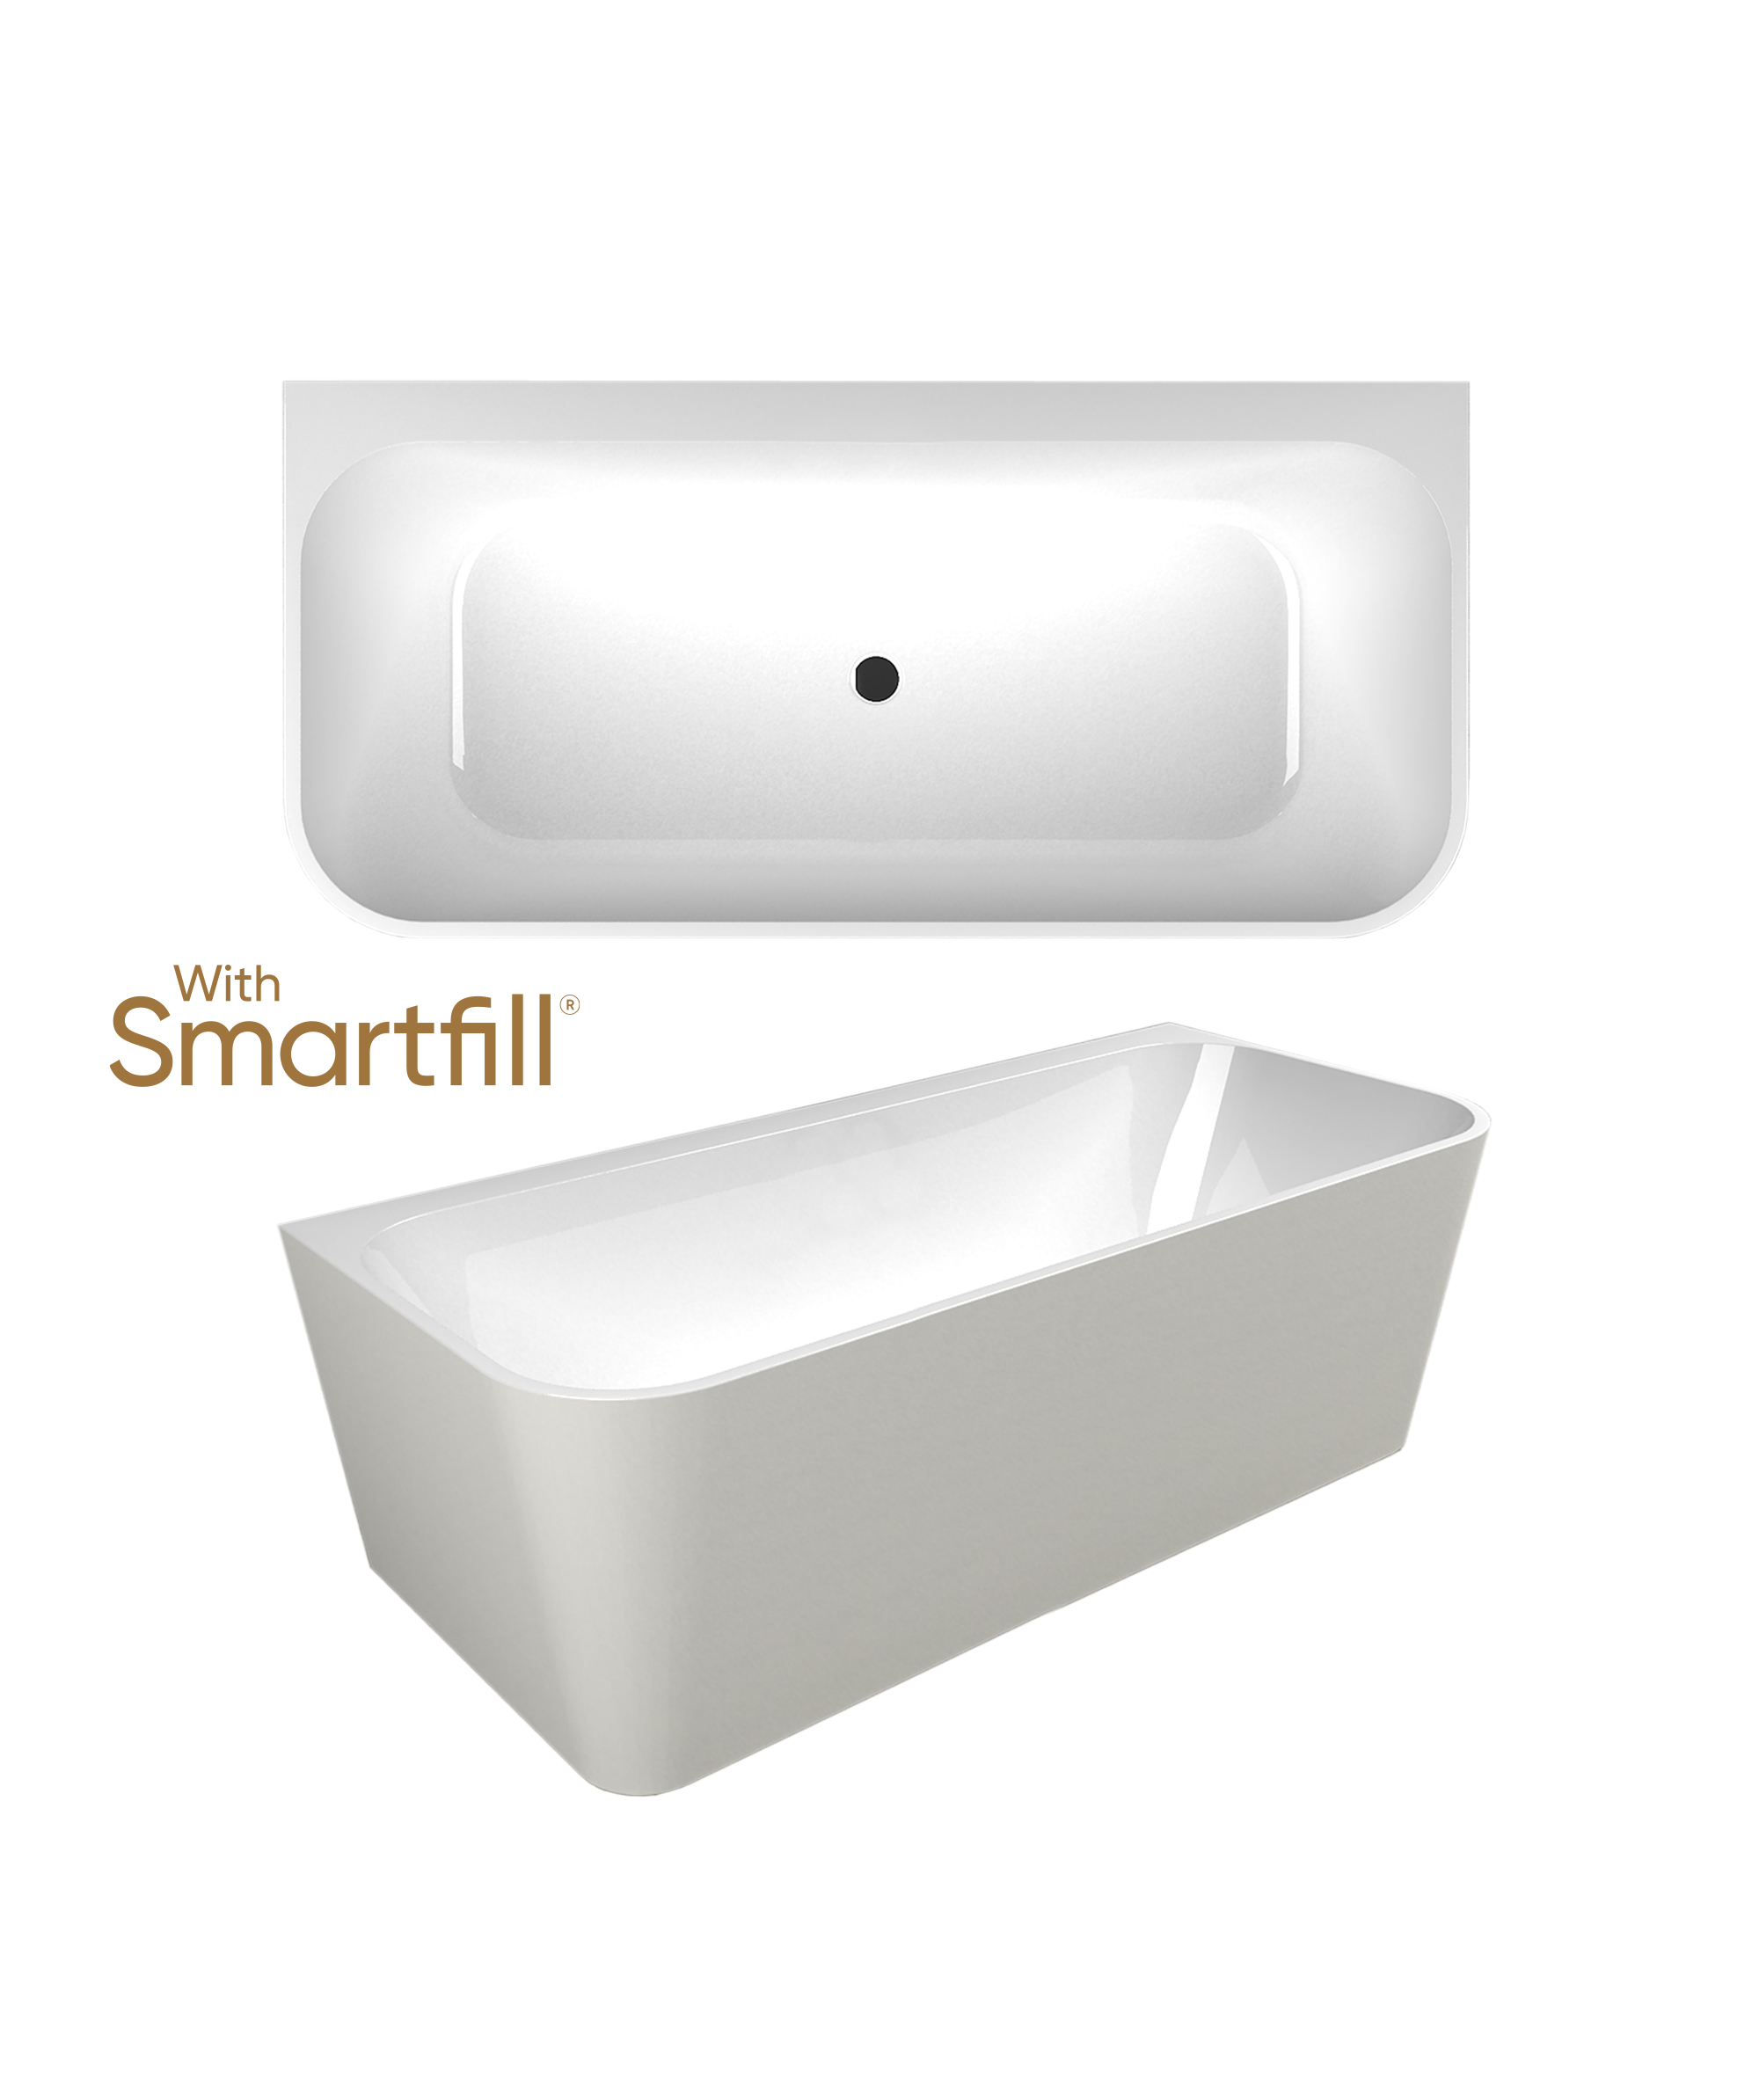 Plati 130 with Smartfill system - Back to Wall bath - 2 sizes